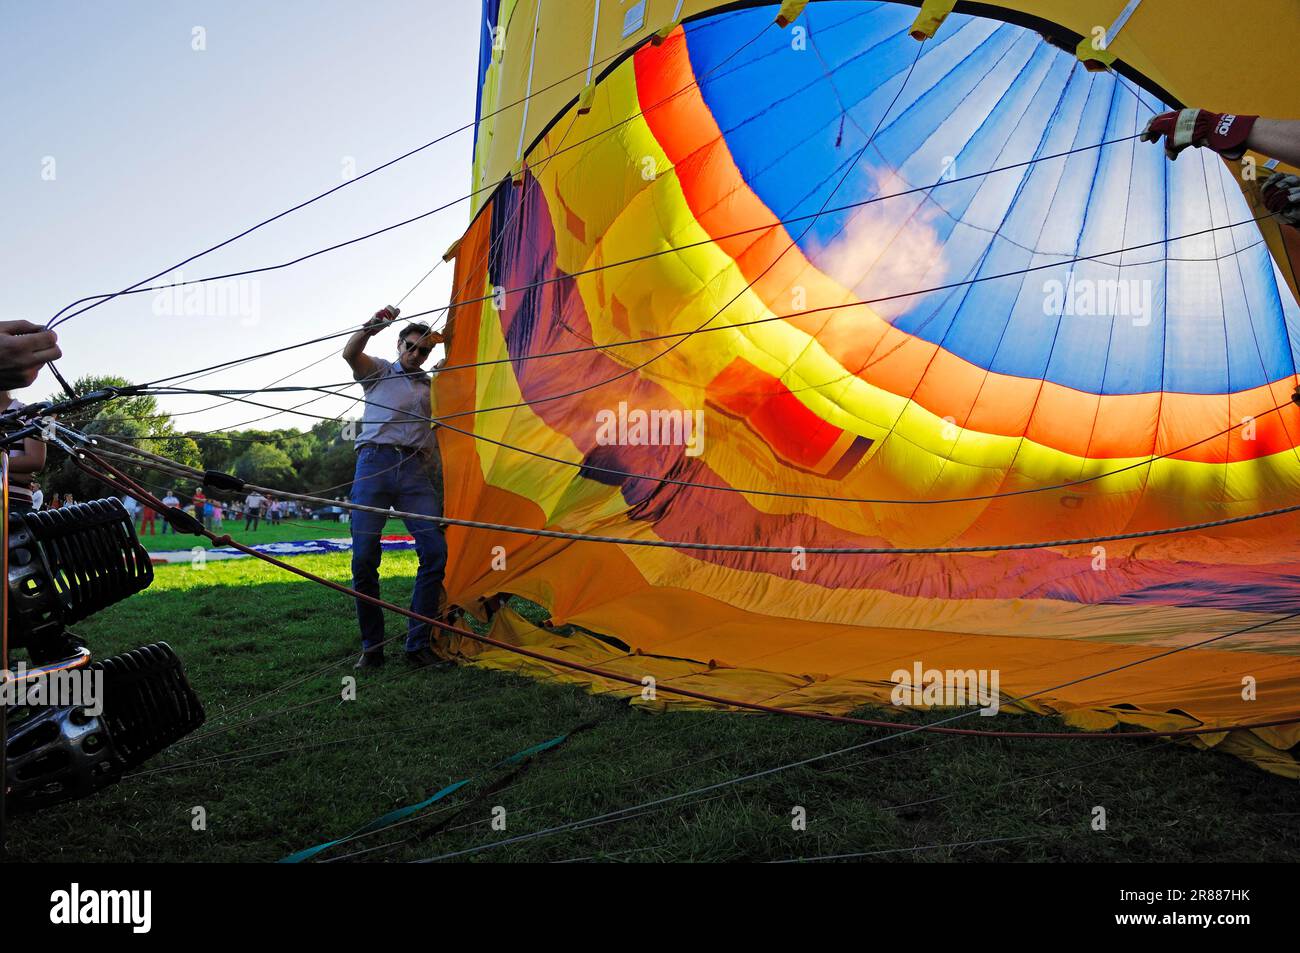 Hot air balloon being inflated, Montgolfiade, Muenster, North Rhine-Westphalia, Germany Stock Photo